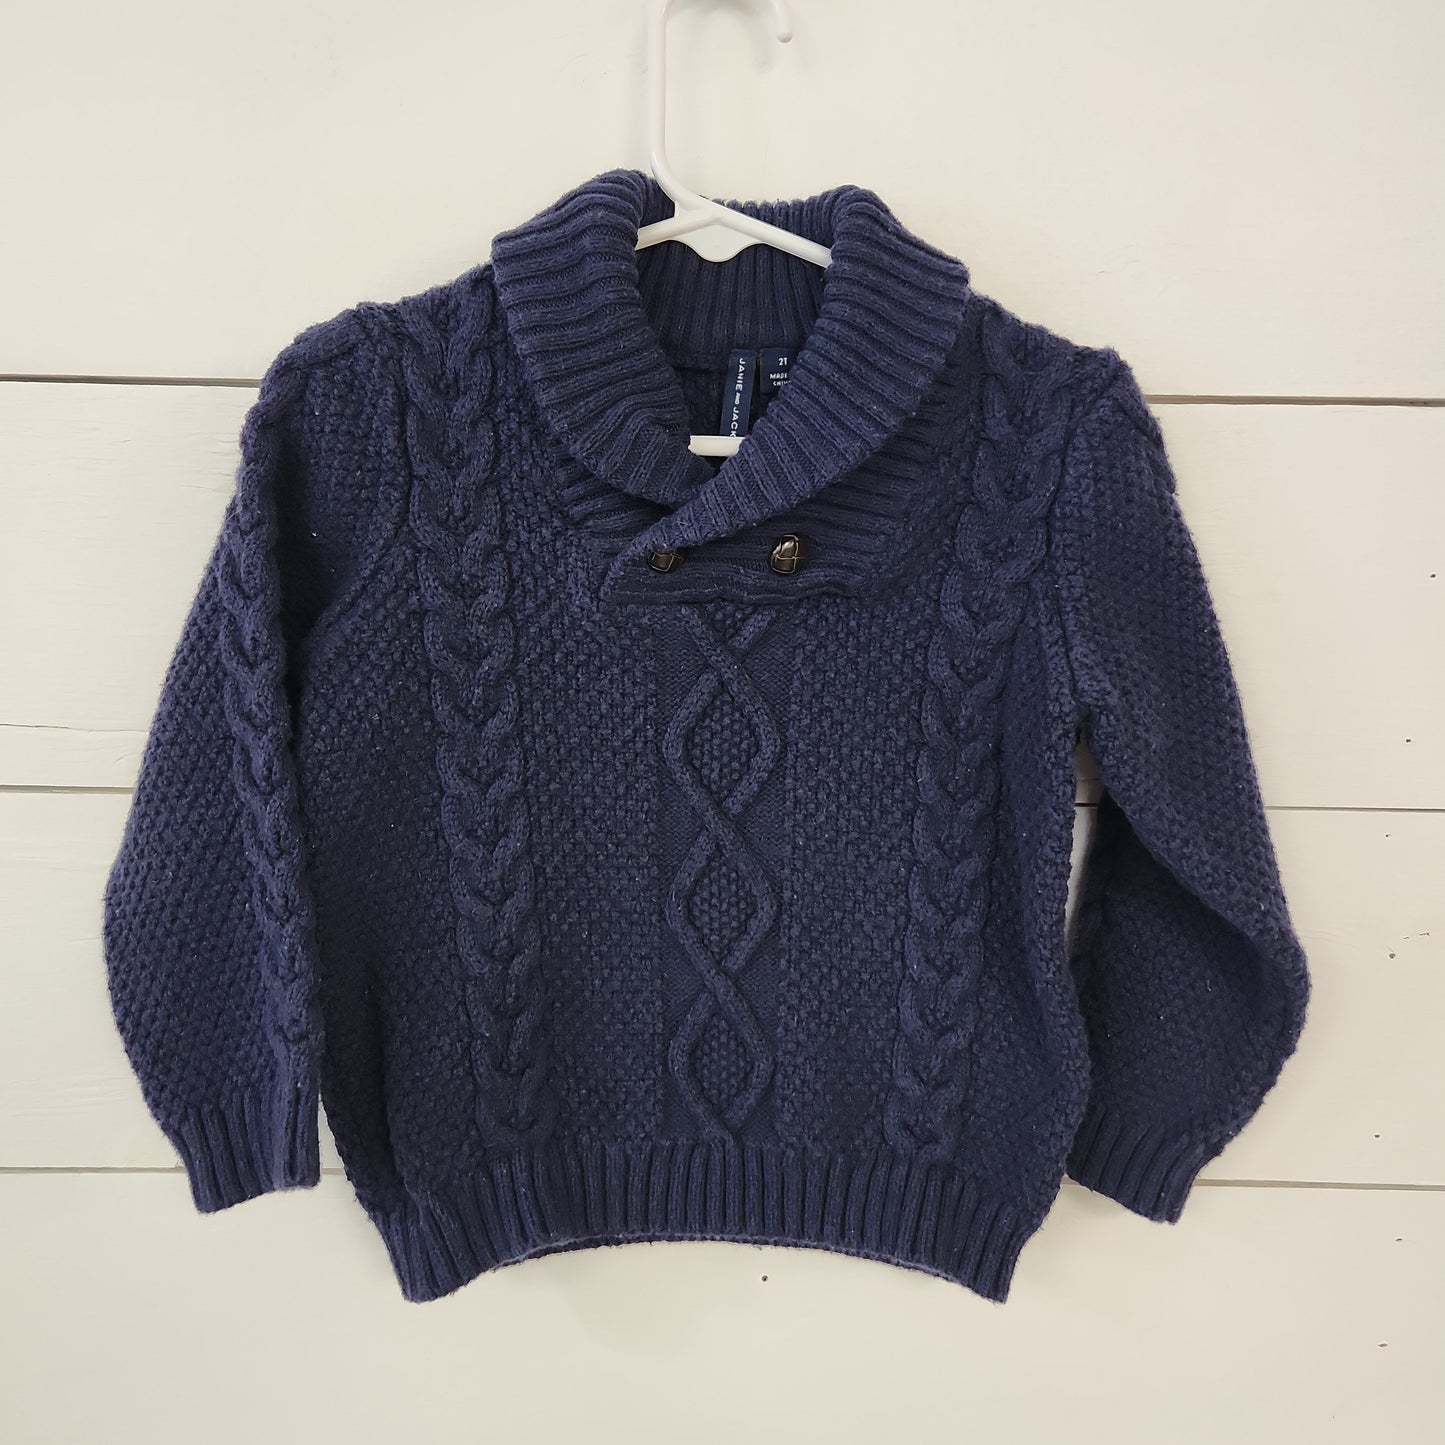 Size 2t | Janie and Jack Sweater | Secondhand